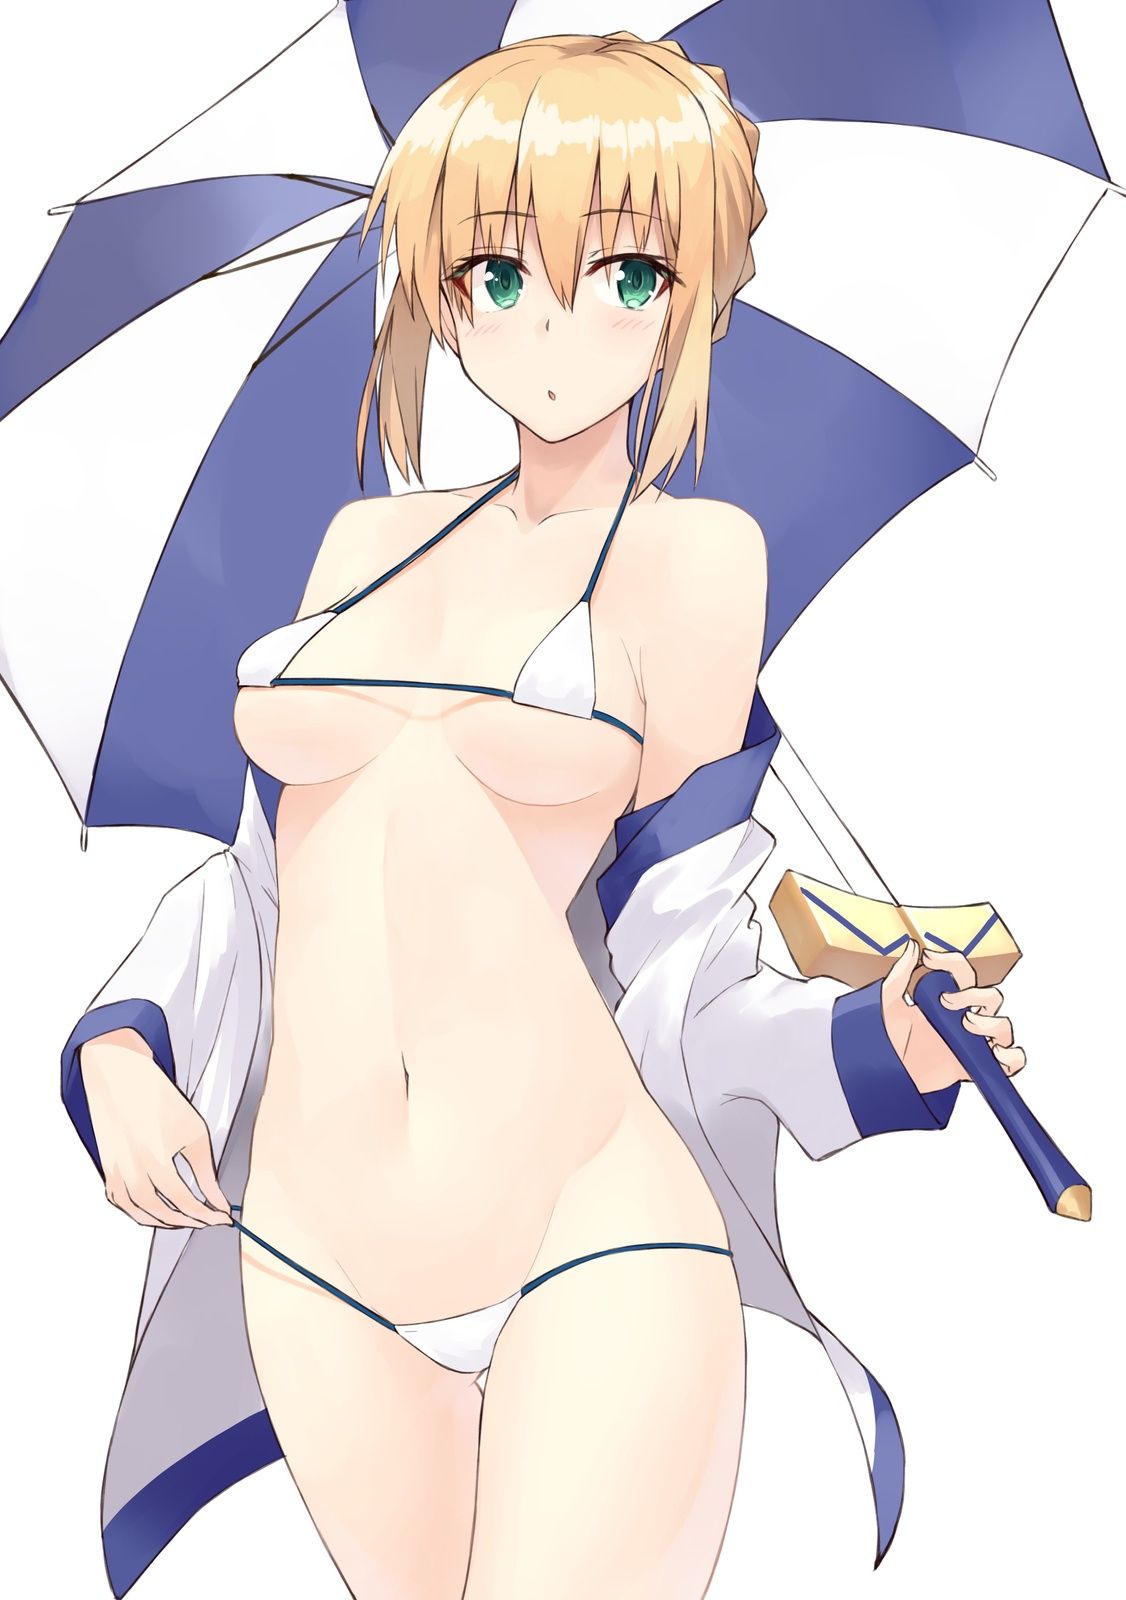 Fate: A do erotic through image that is becoming saber's iki face 19